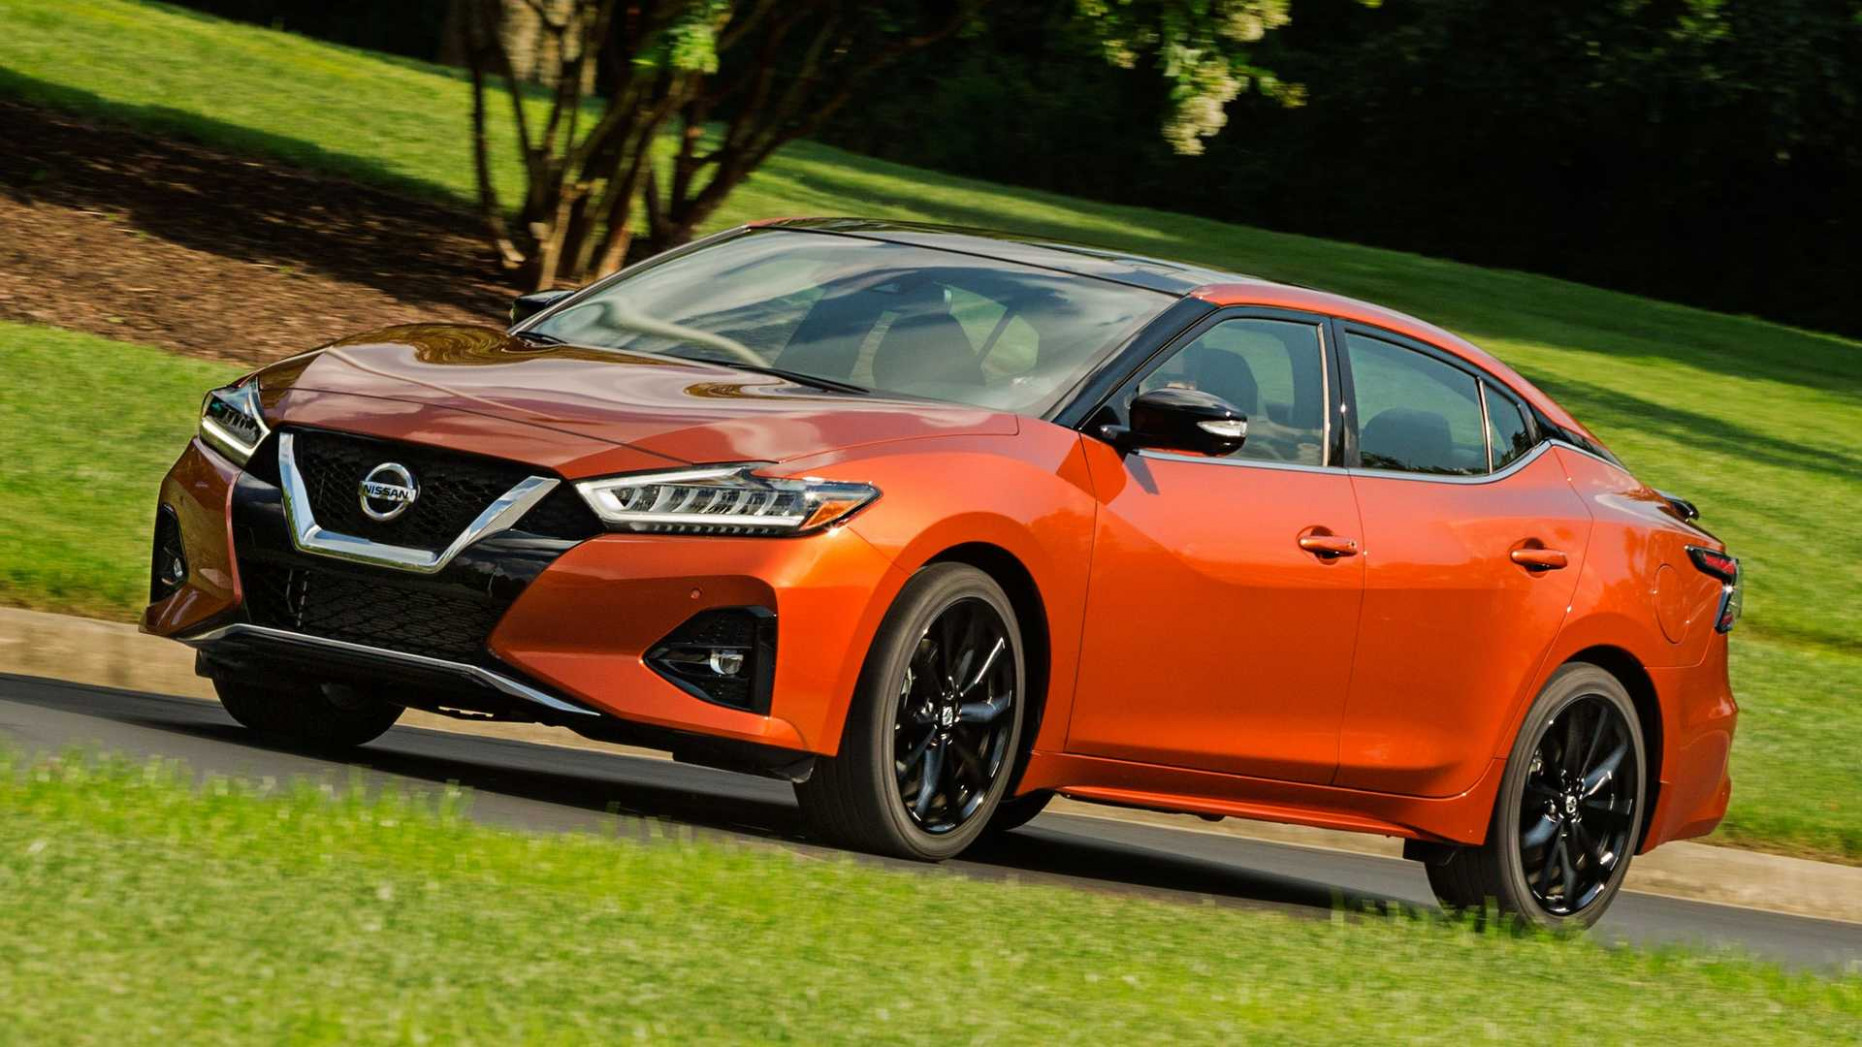 Redesign When Will The 2022 Nissan Maxima Come Out